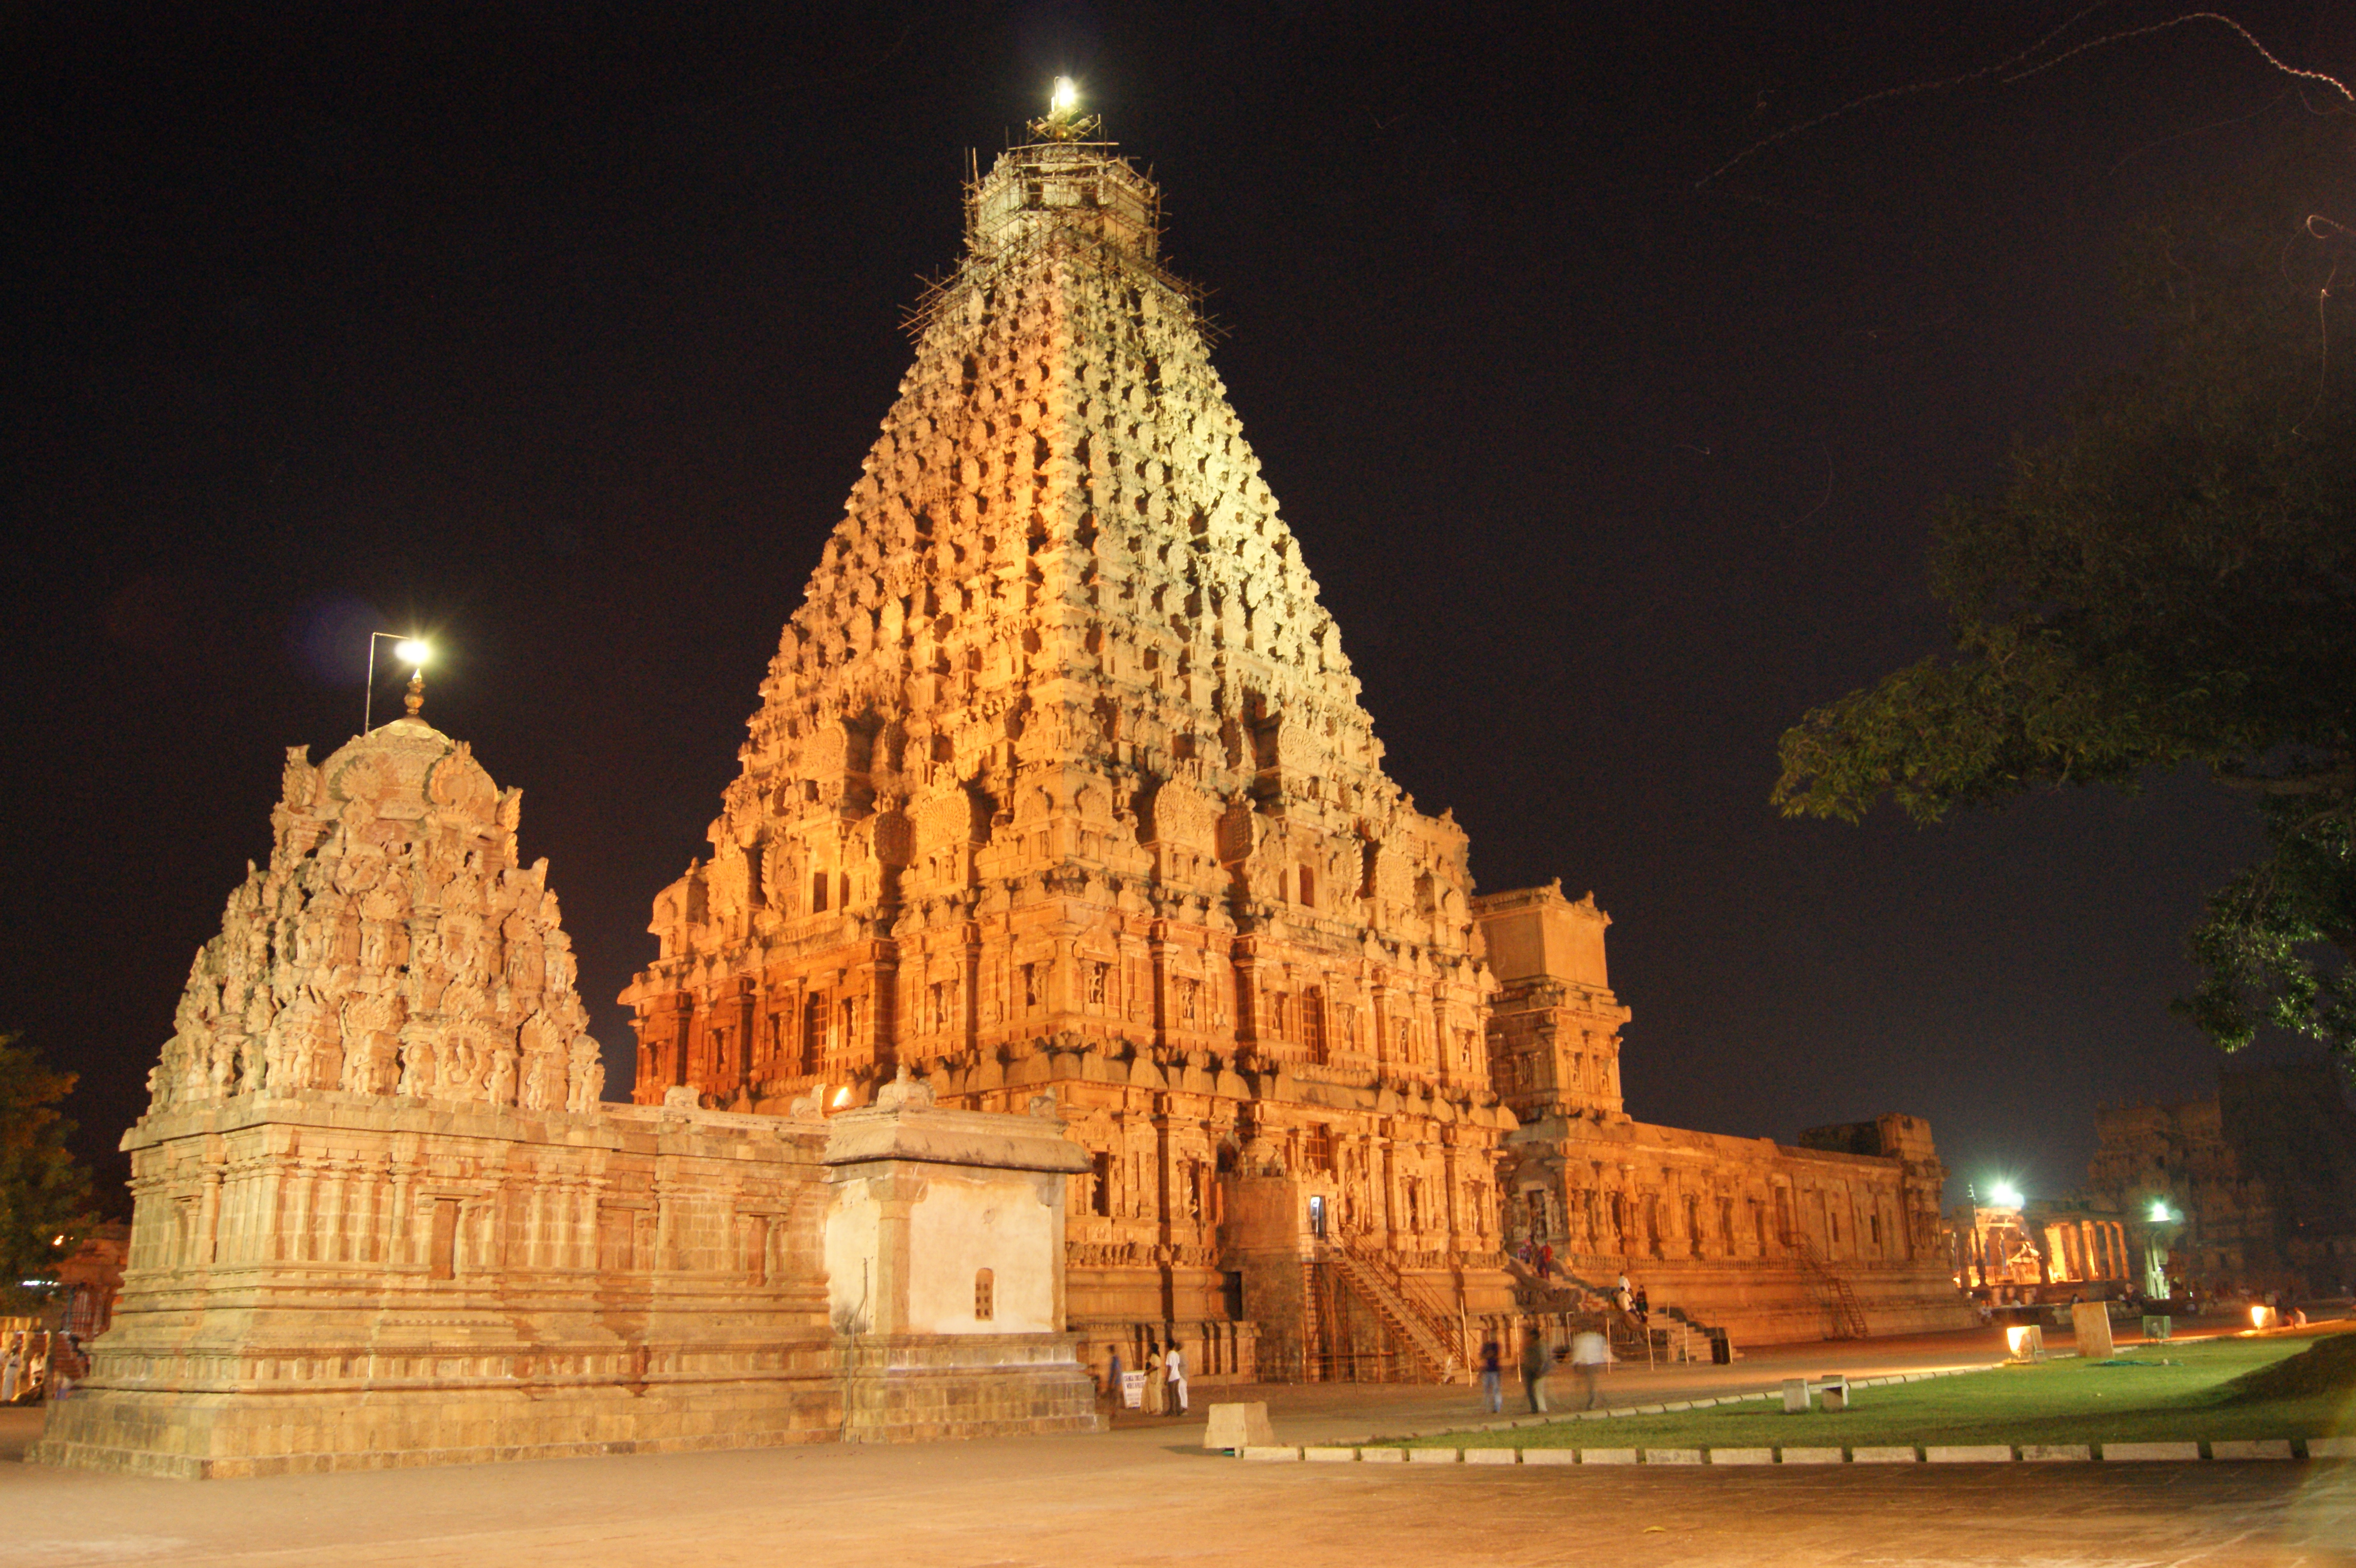 File:Big temple-Thabjavur at night.JPG - Wikimedia Commons